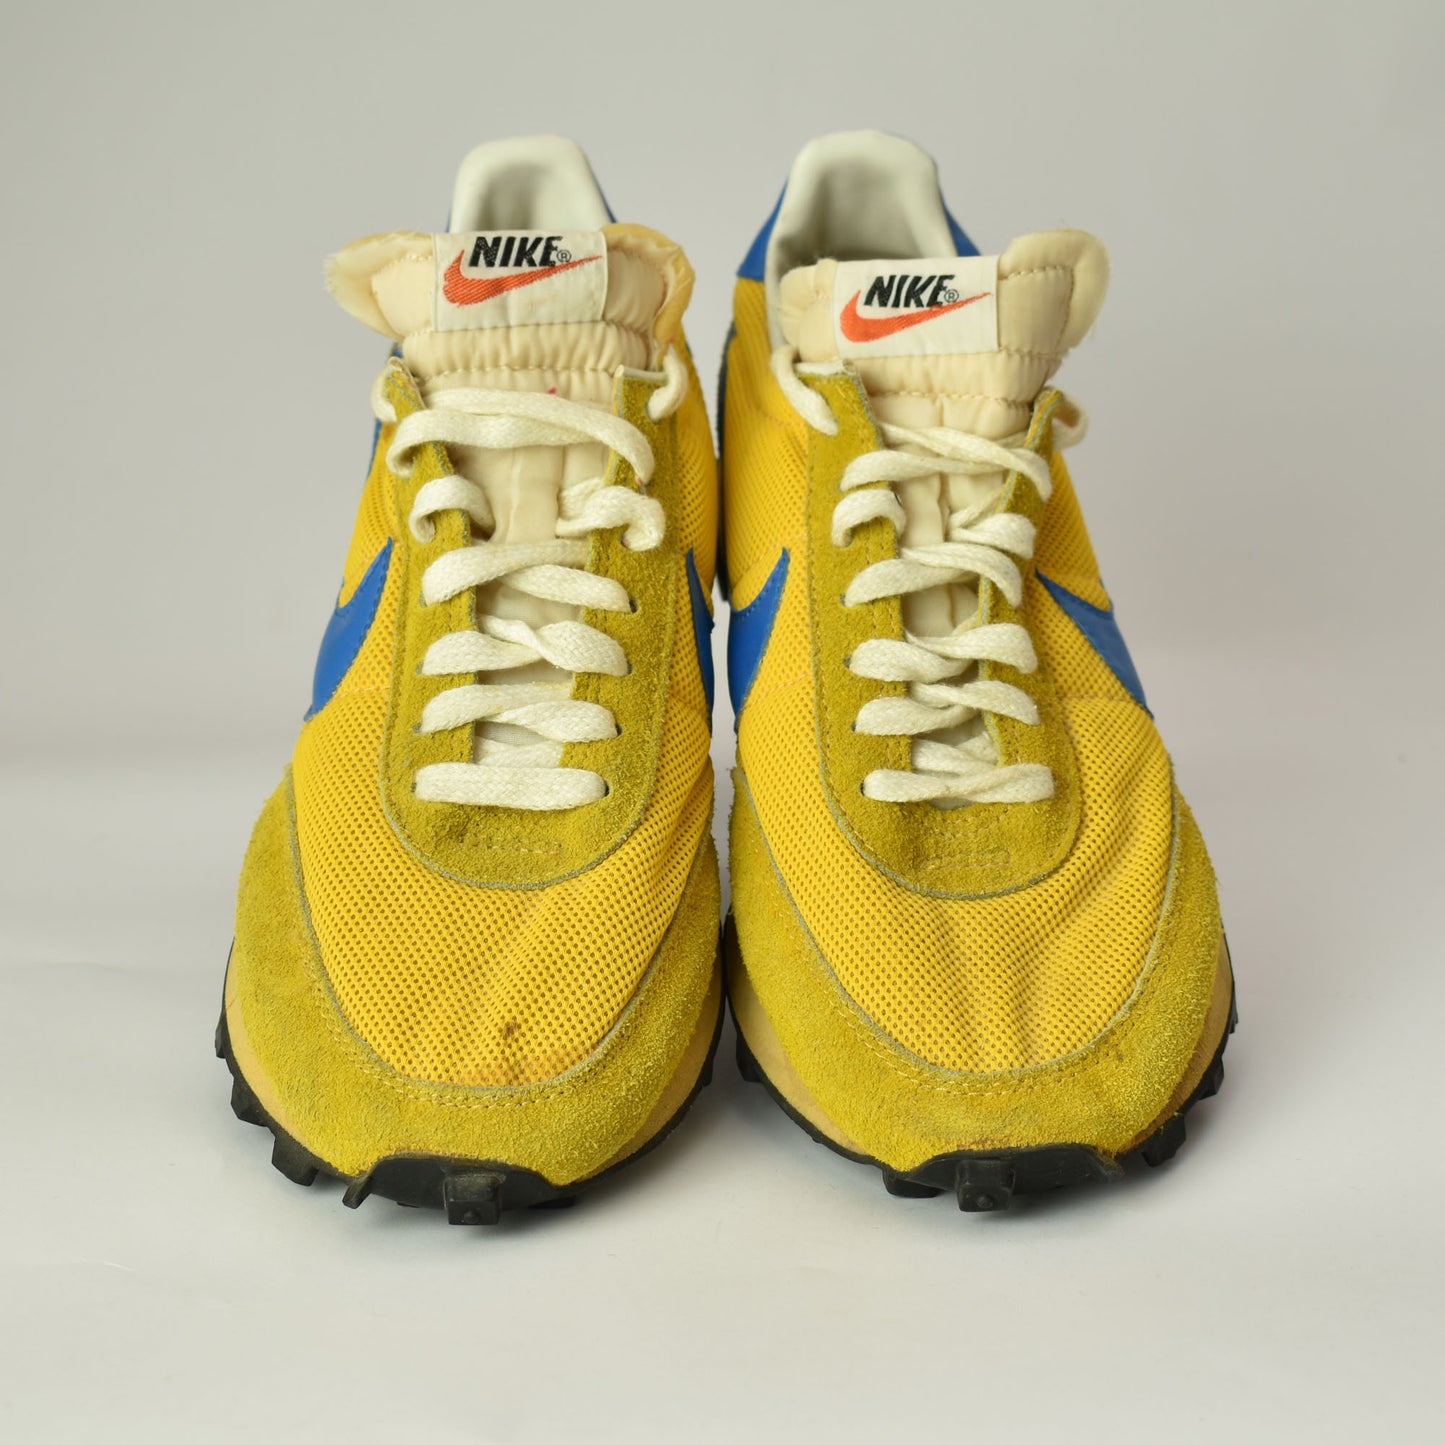 Vintage 1979 Nike Waffle Tailwind Trainers Sneakers Yellow Shoes Made in Korea Size 7